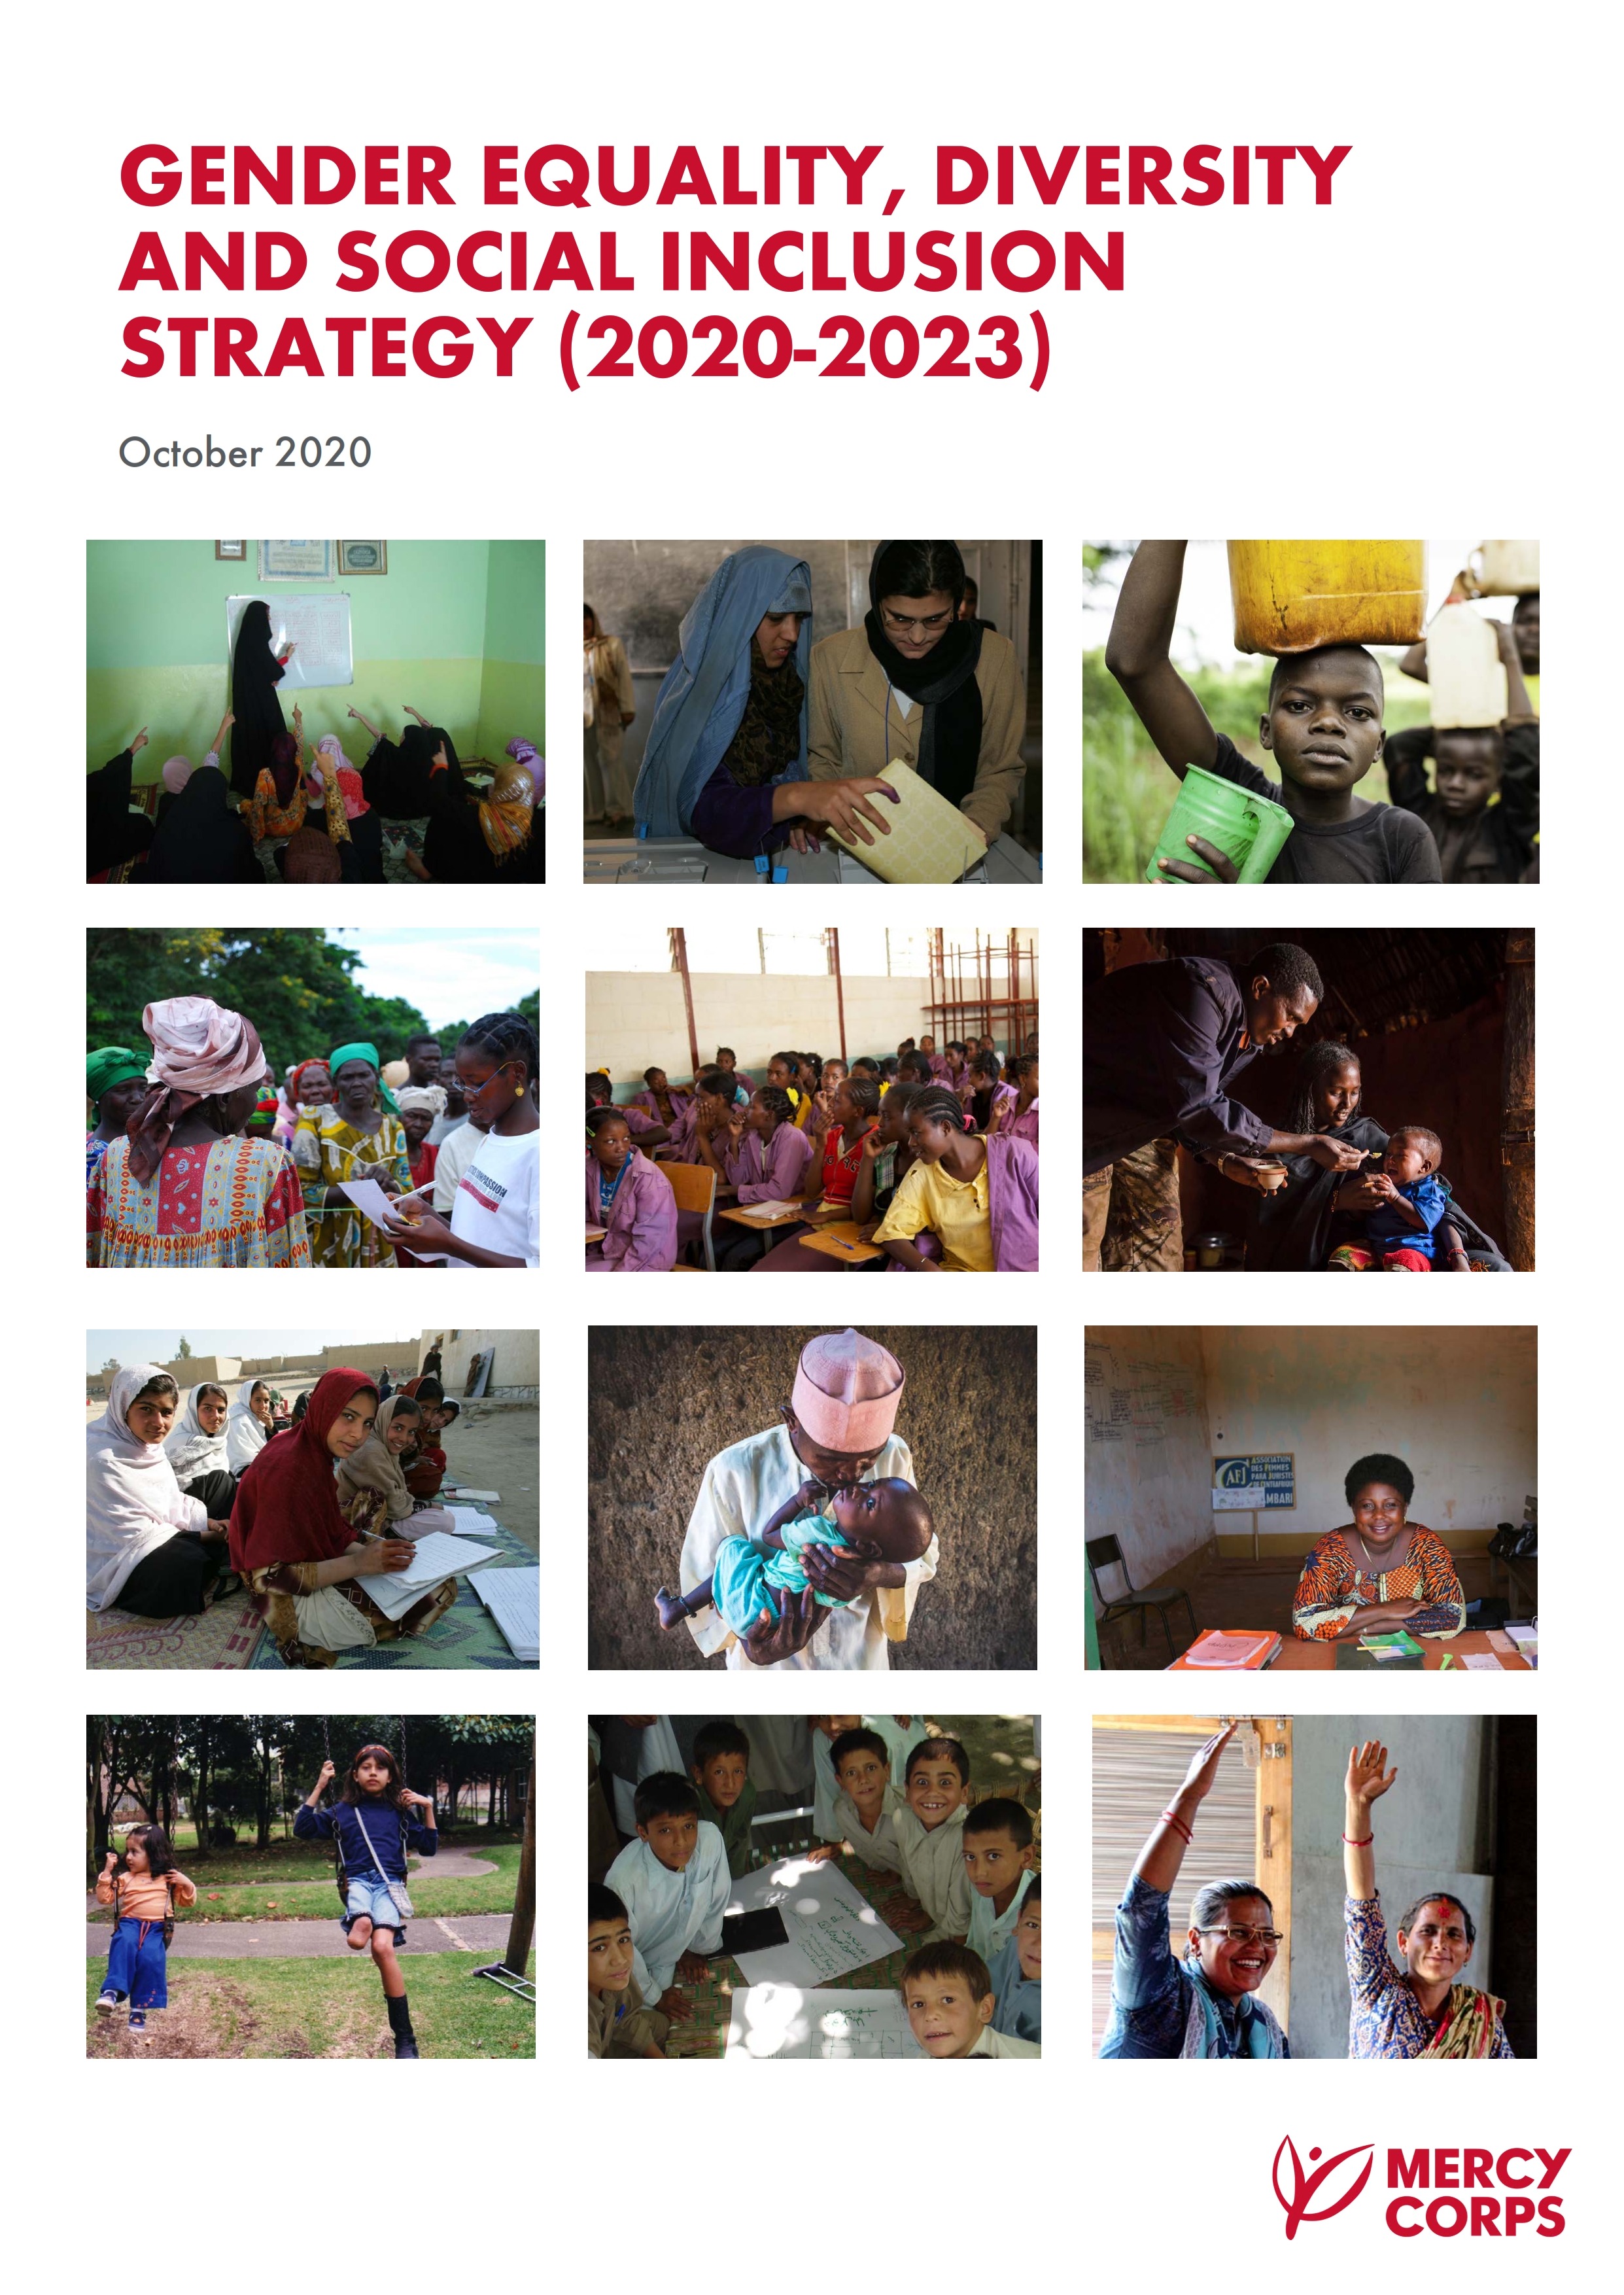 GENDER EQUALITY, DIVERSITY AND SOCIAL INCLUSION STRATEGY (2020-2023)